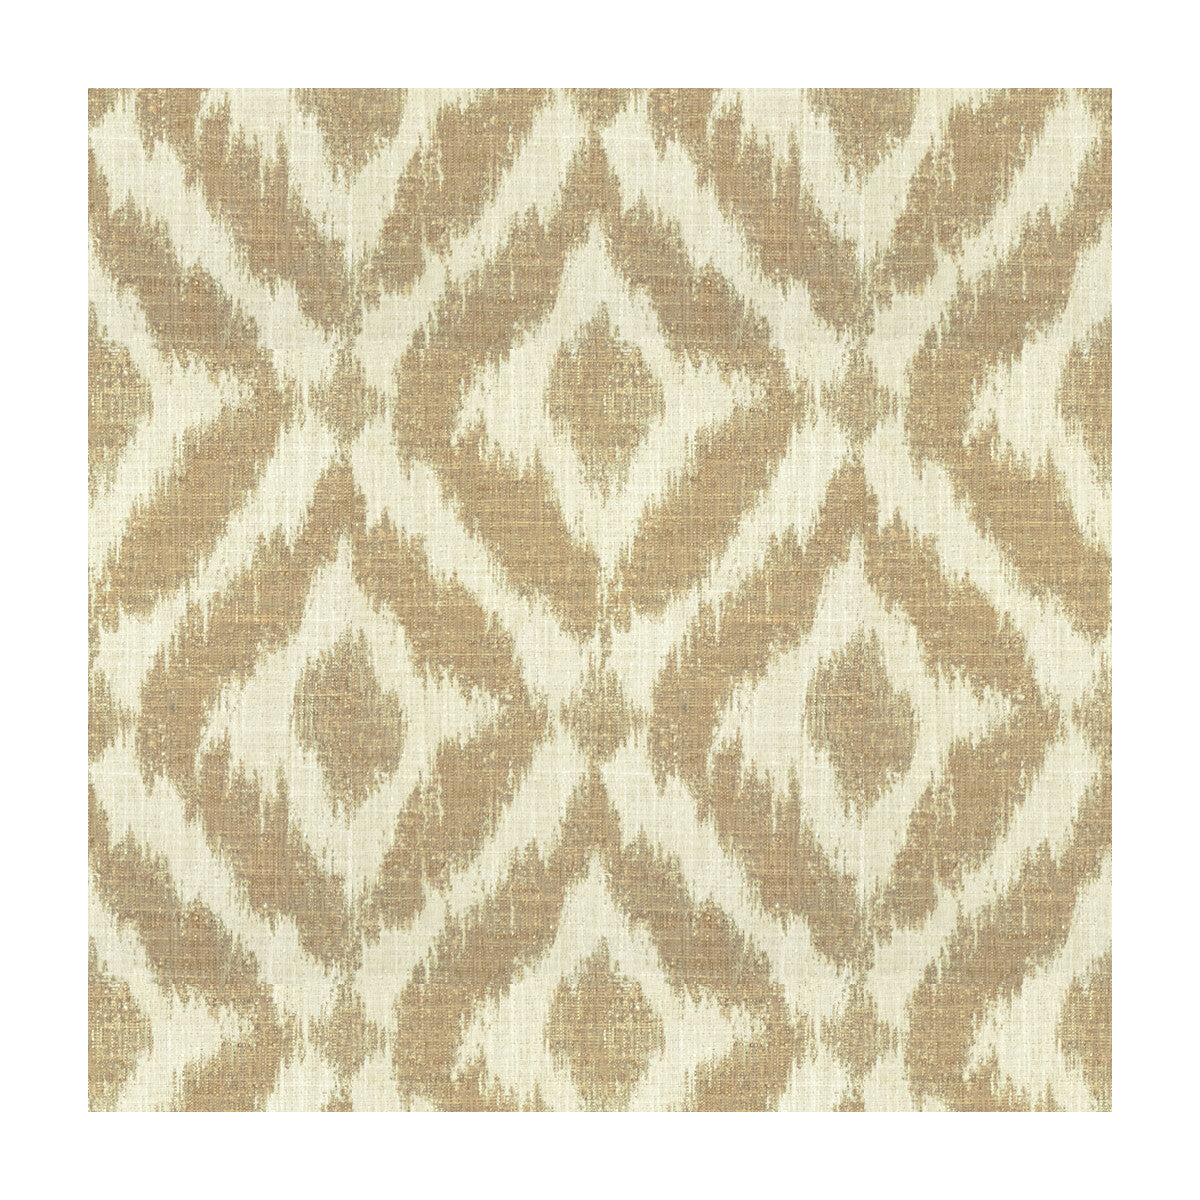 Lyra fabric in ivory/beige color - pattern 2015142.16.0 - by Lee Jofa in the Aerin 2 collection